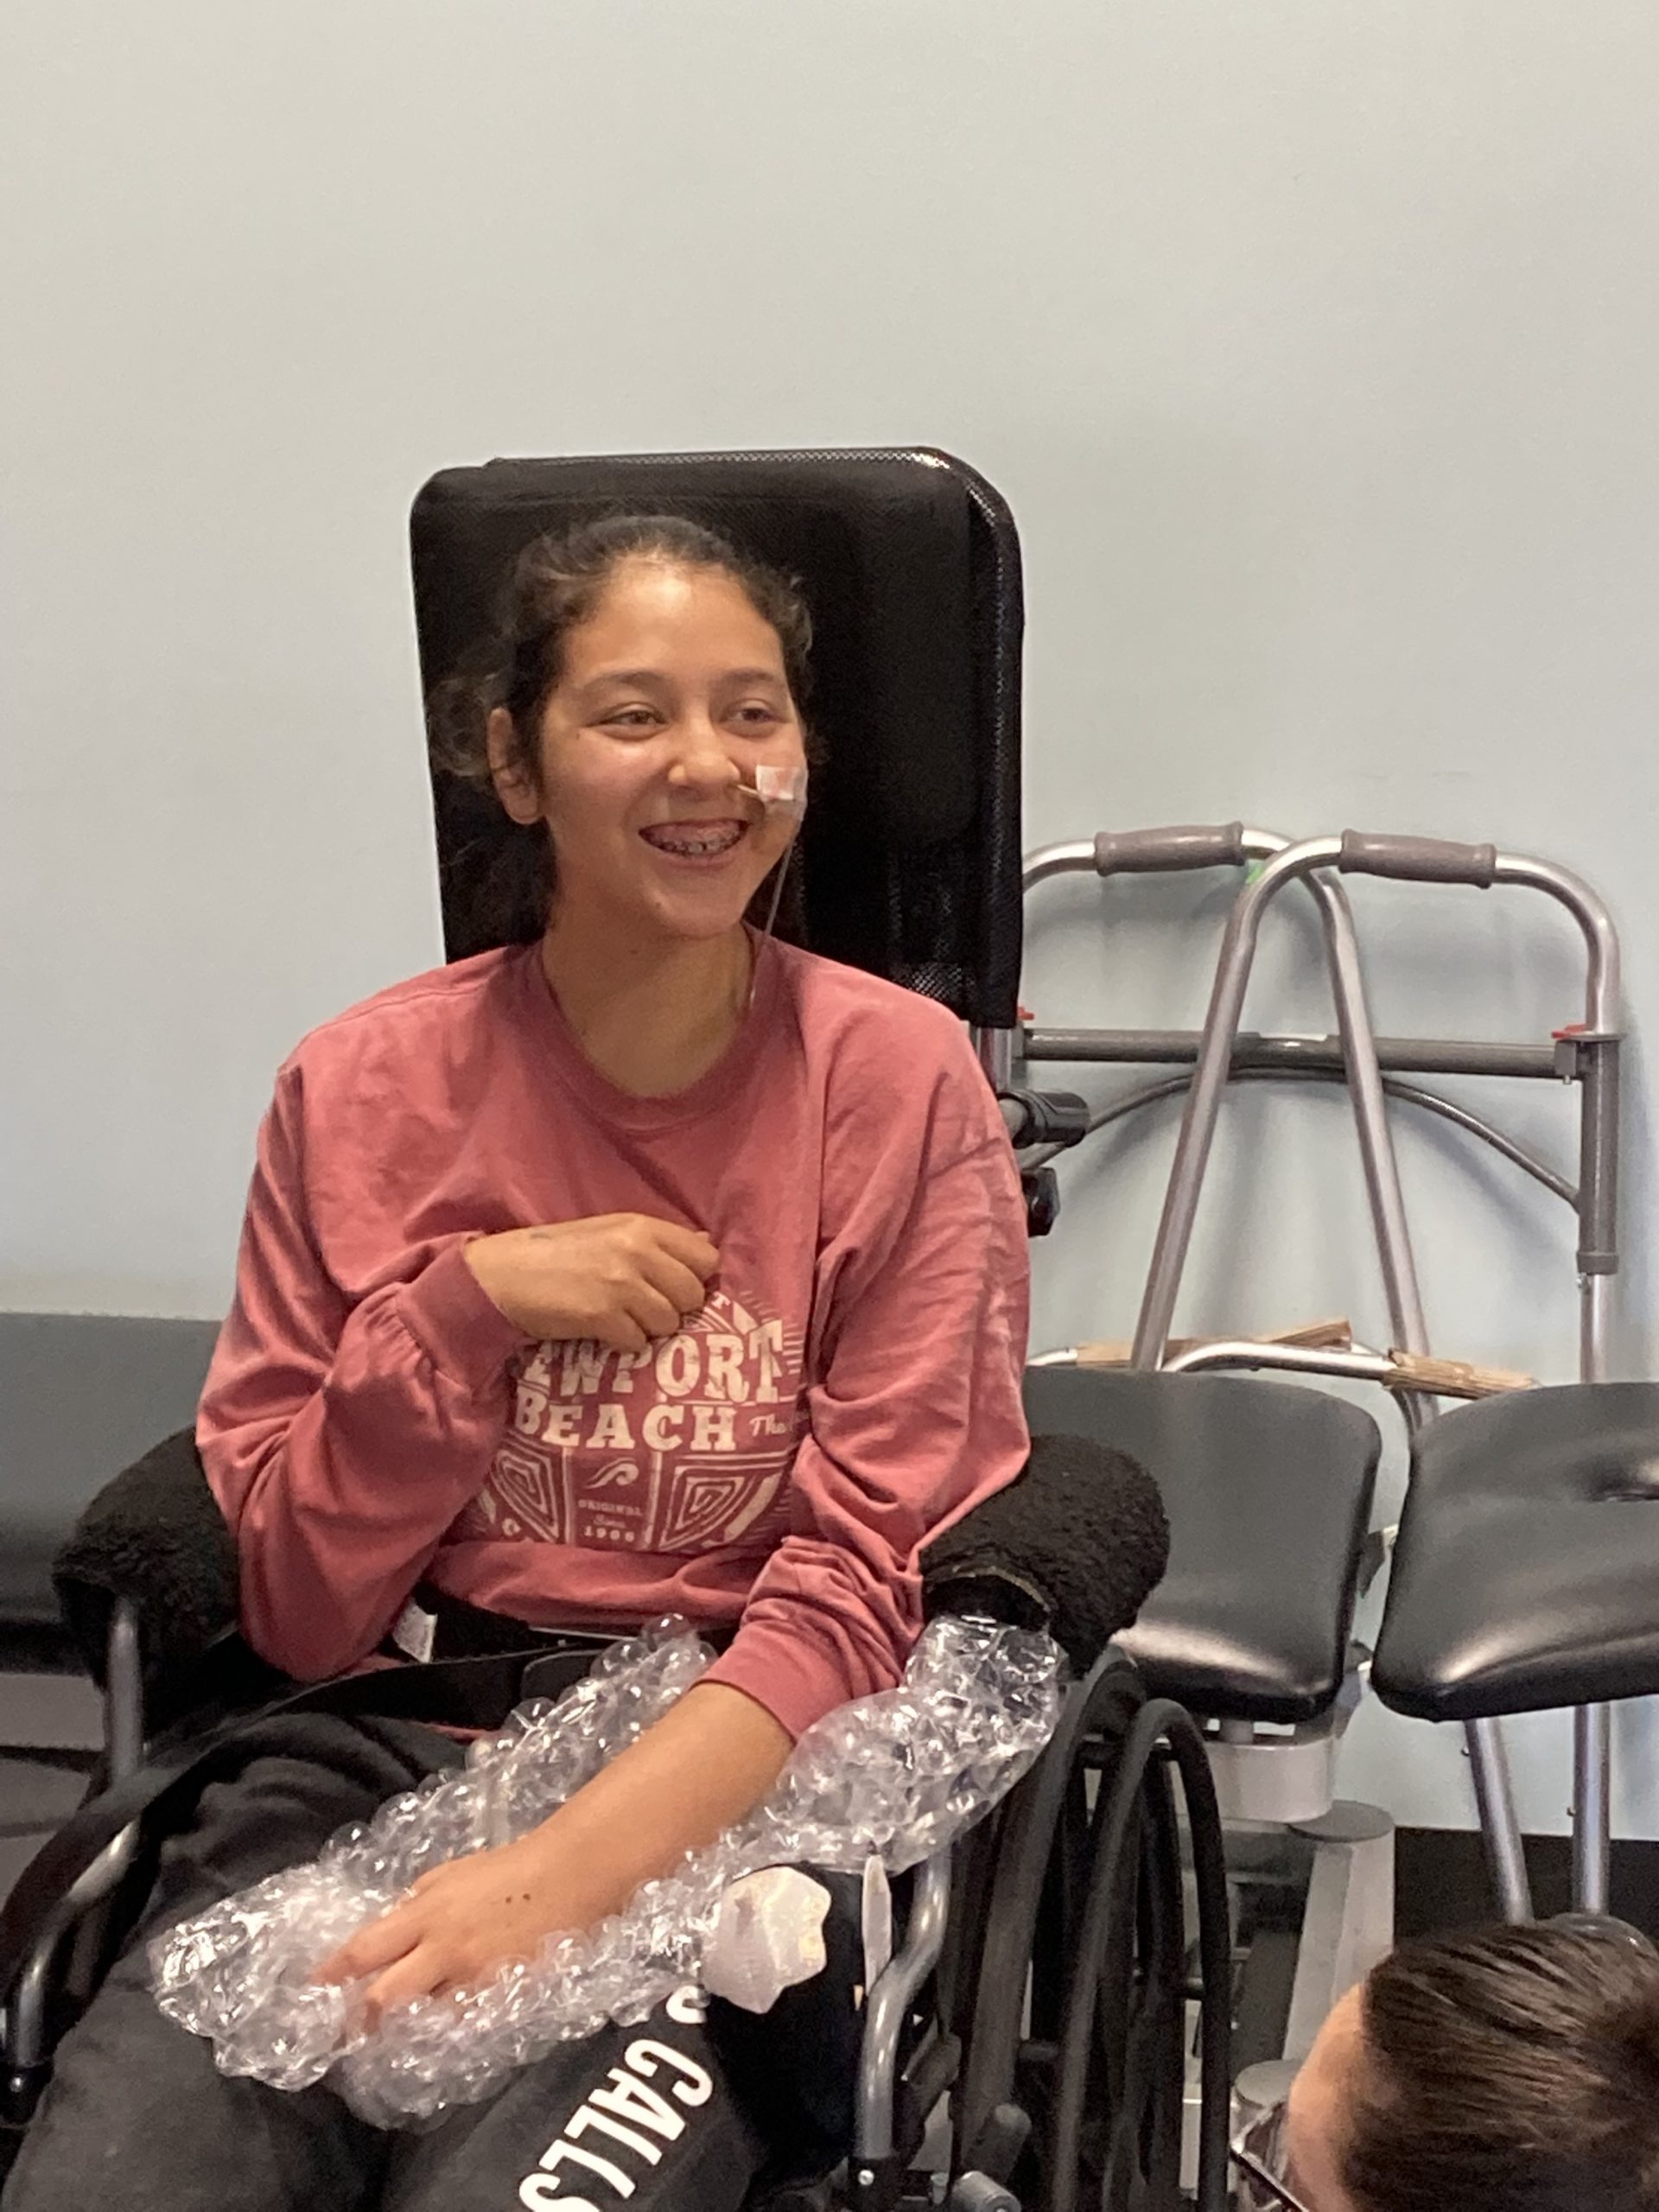 Bella Adlah in her first therapy session since regaining her vision last week at Re+active Physical Therapy in California.